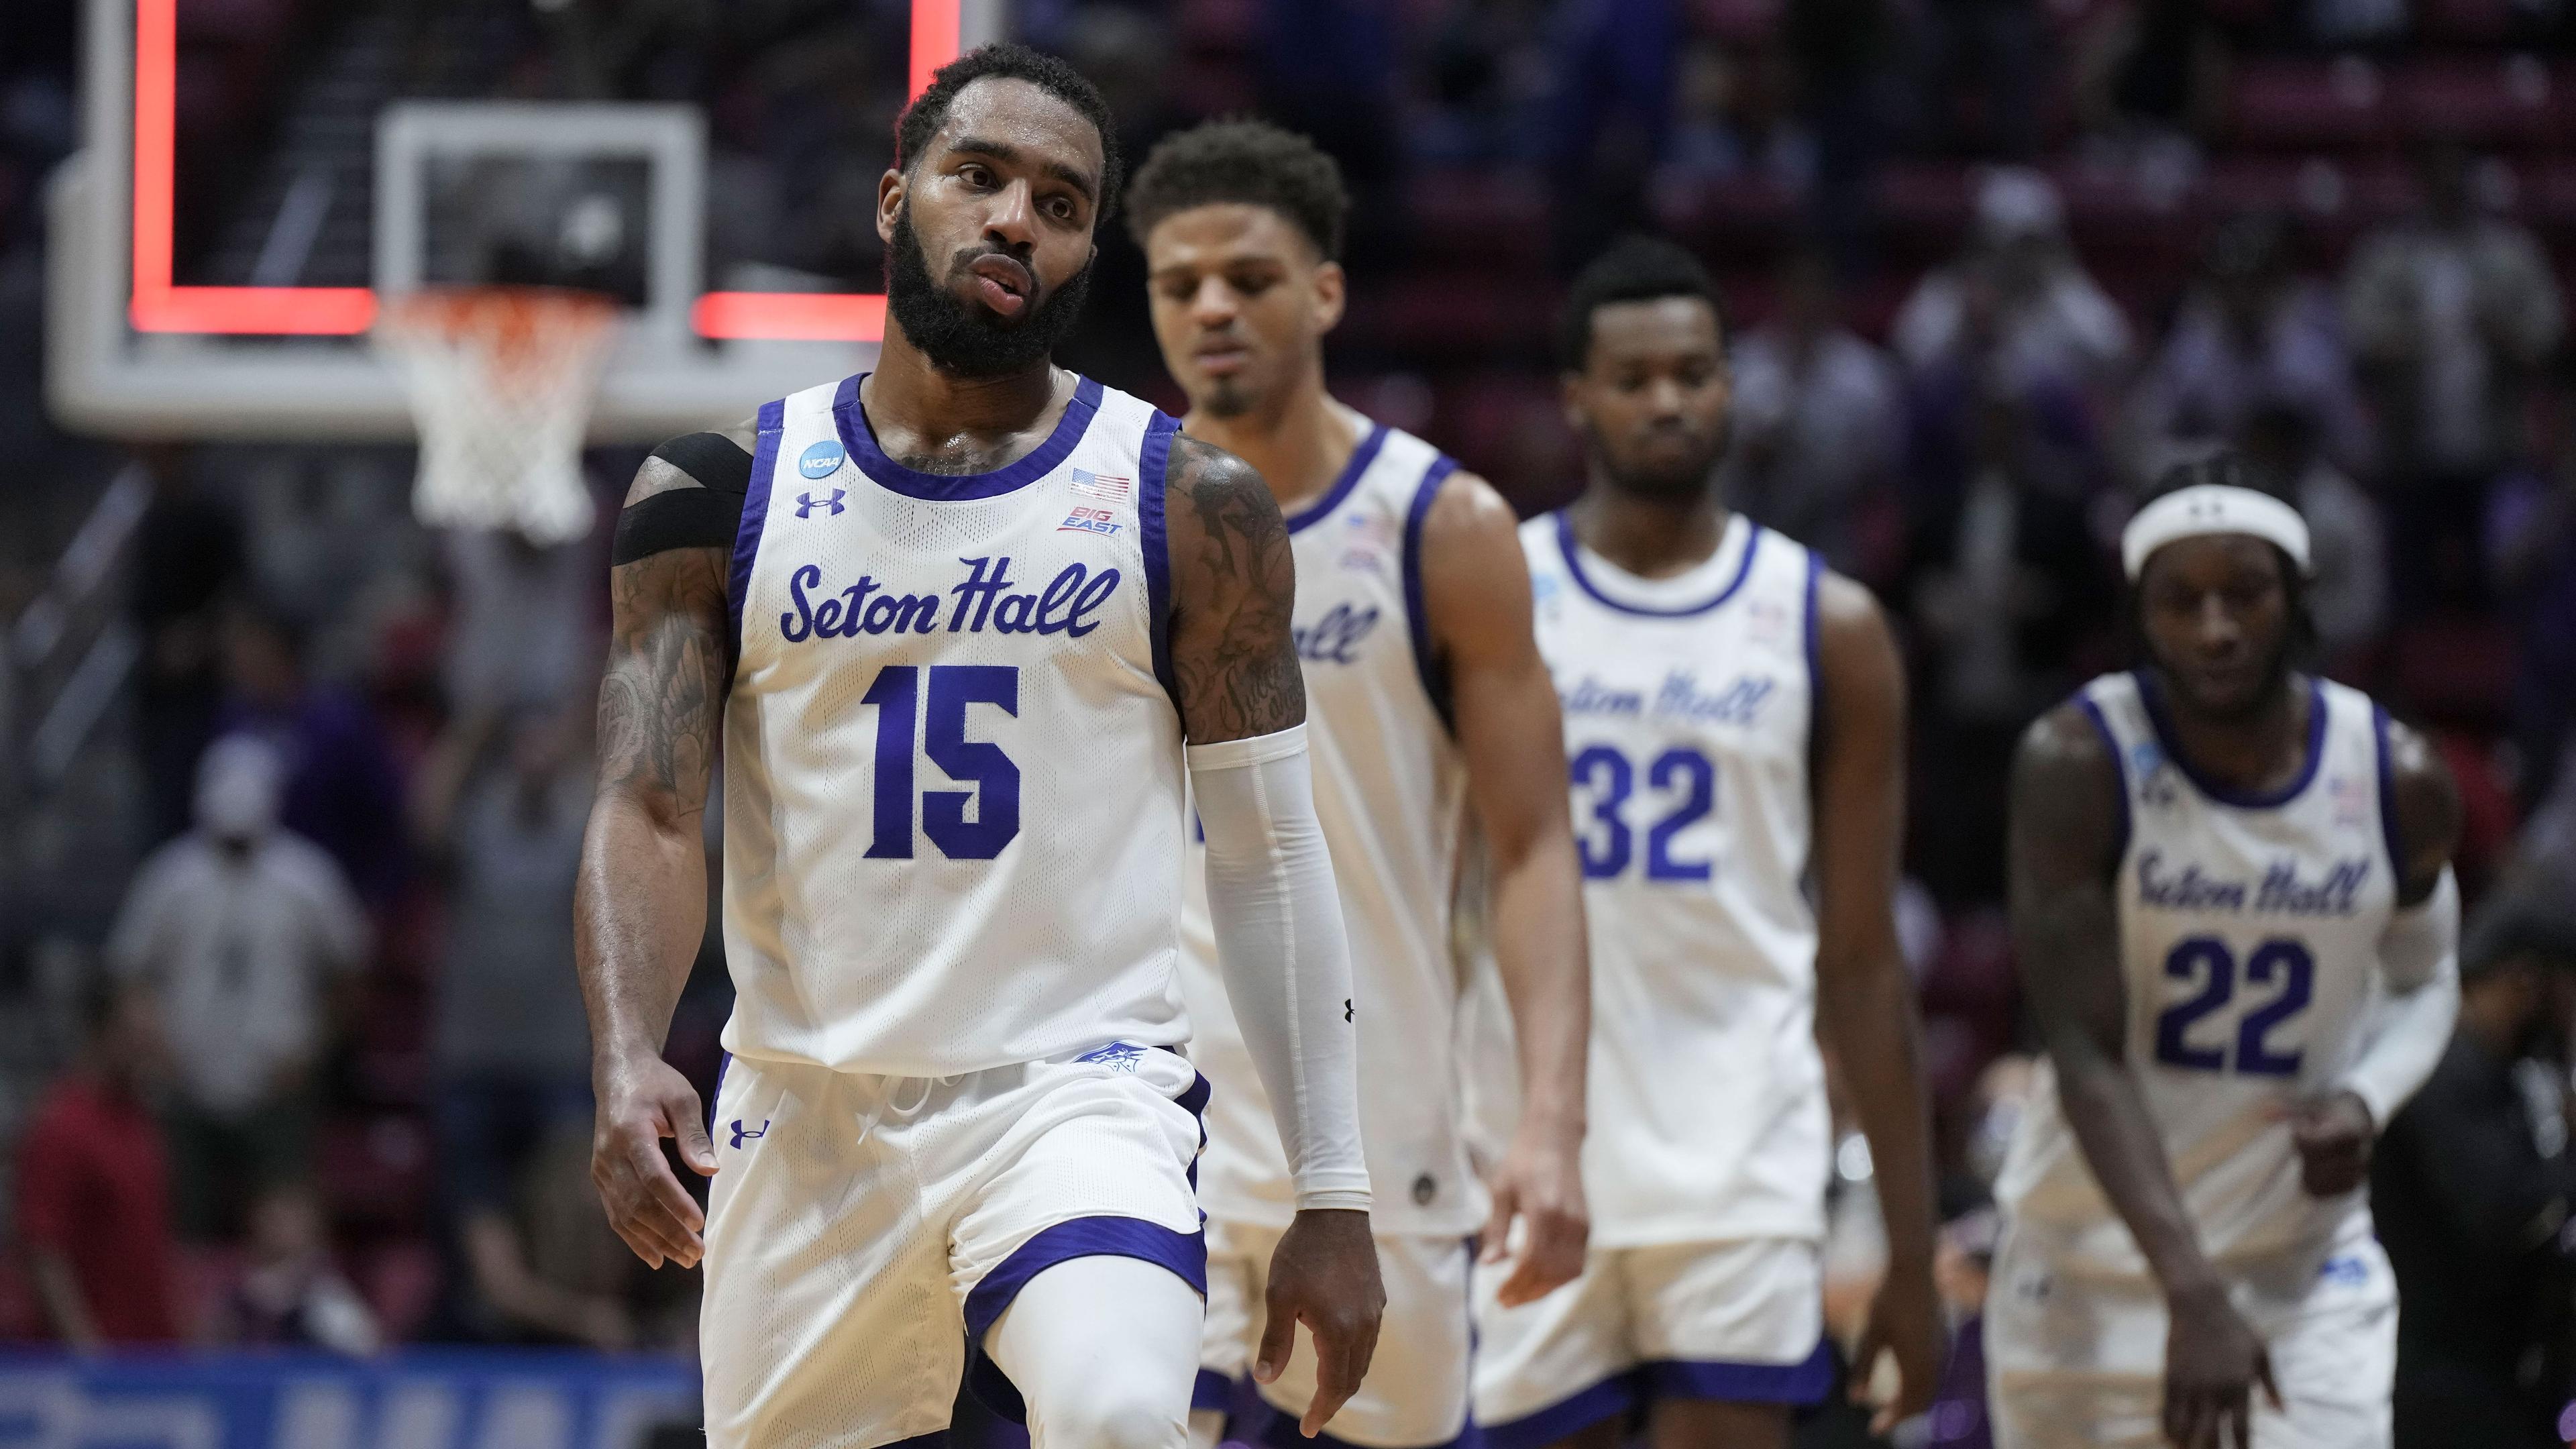 Mar 18, 2022; San Diego, CA, USA; Seton Hall Pirates guard Jamir Harris (15) reacts after the game against the TCU Horned Frogs during the first round of the 2022 NCAA Tournament at Viejas Arena. / Kirby Lee-USA TODAY Sports